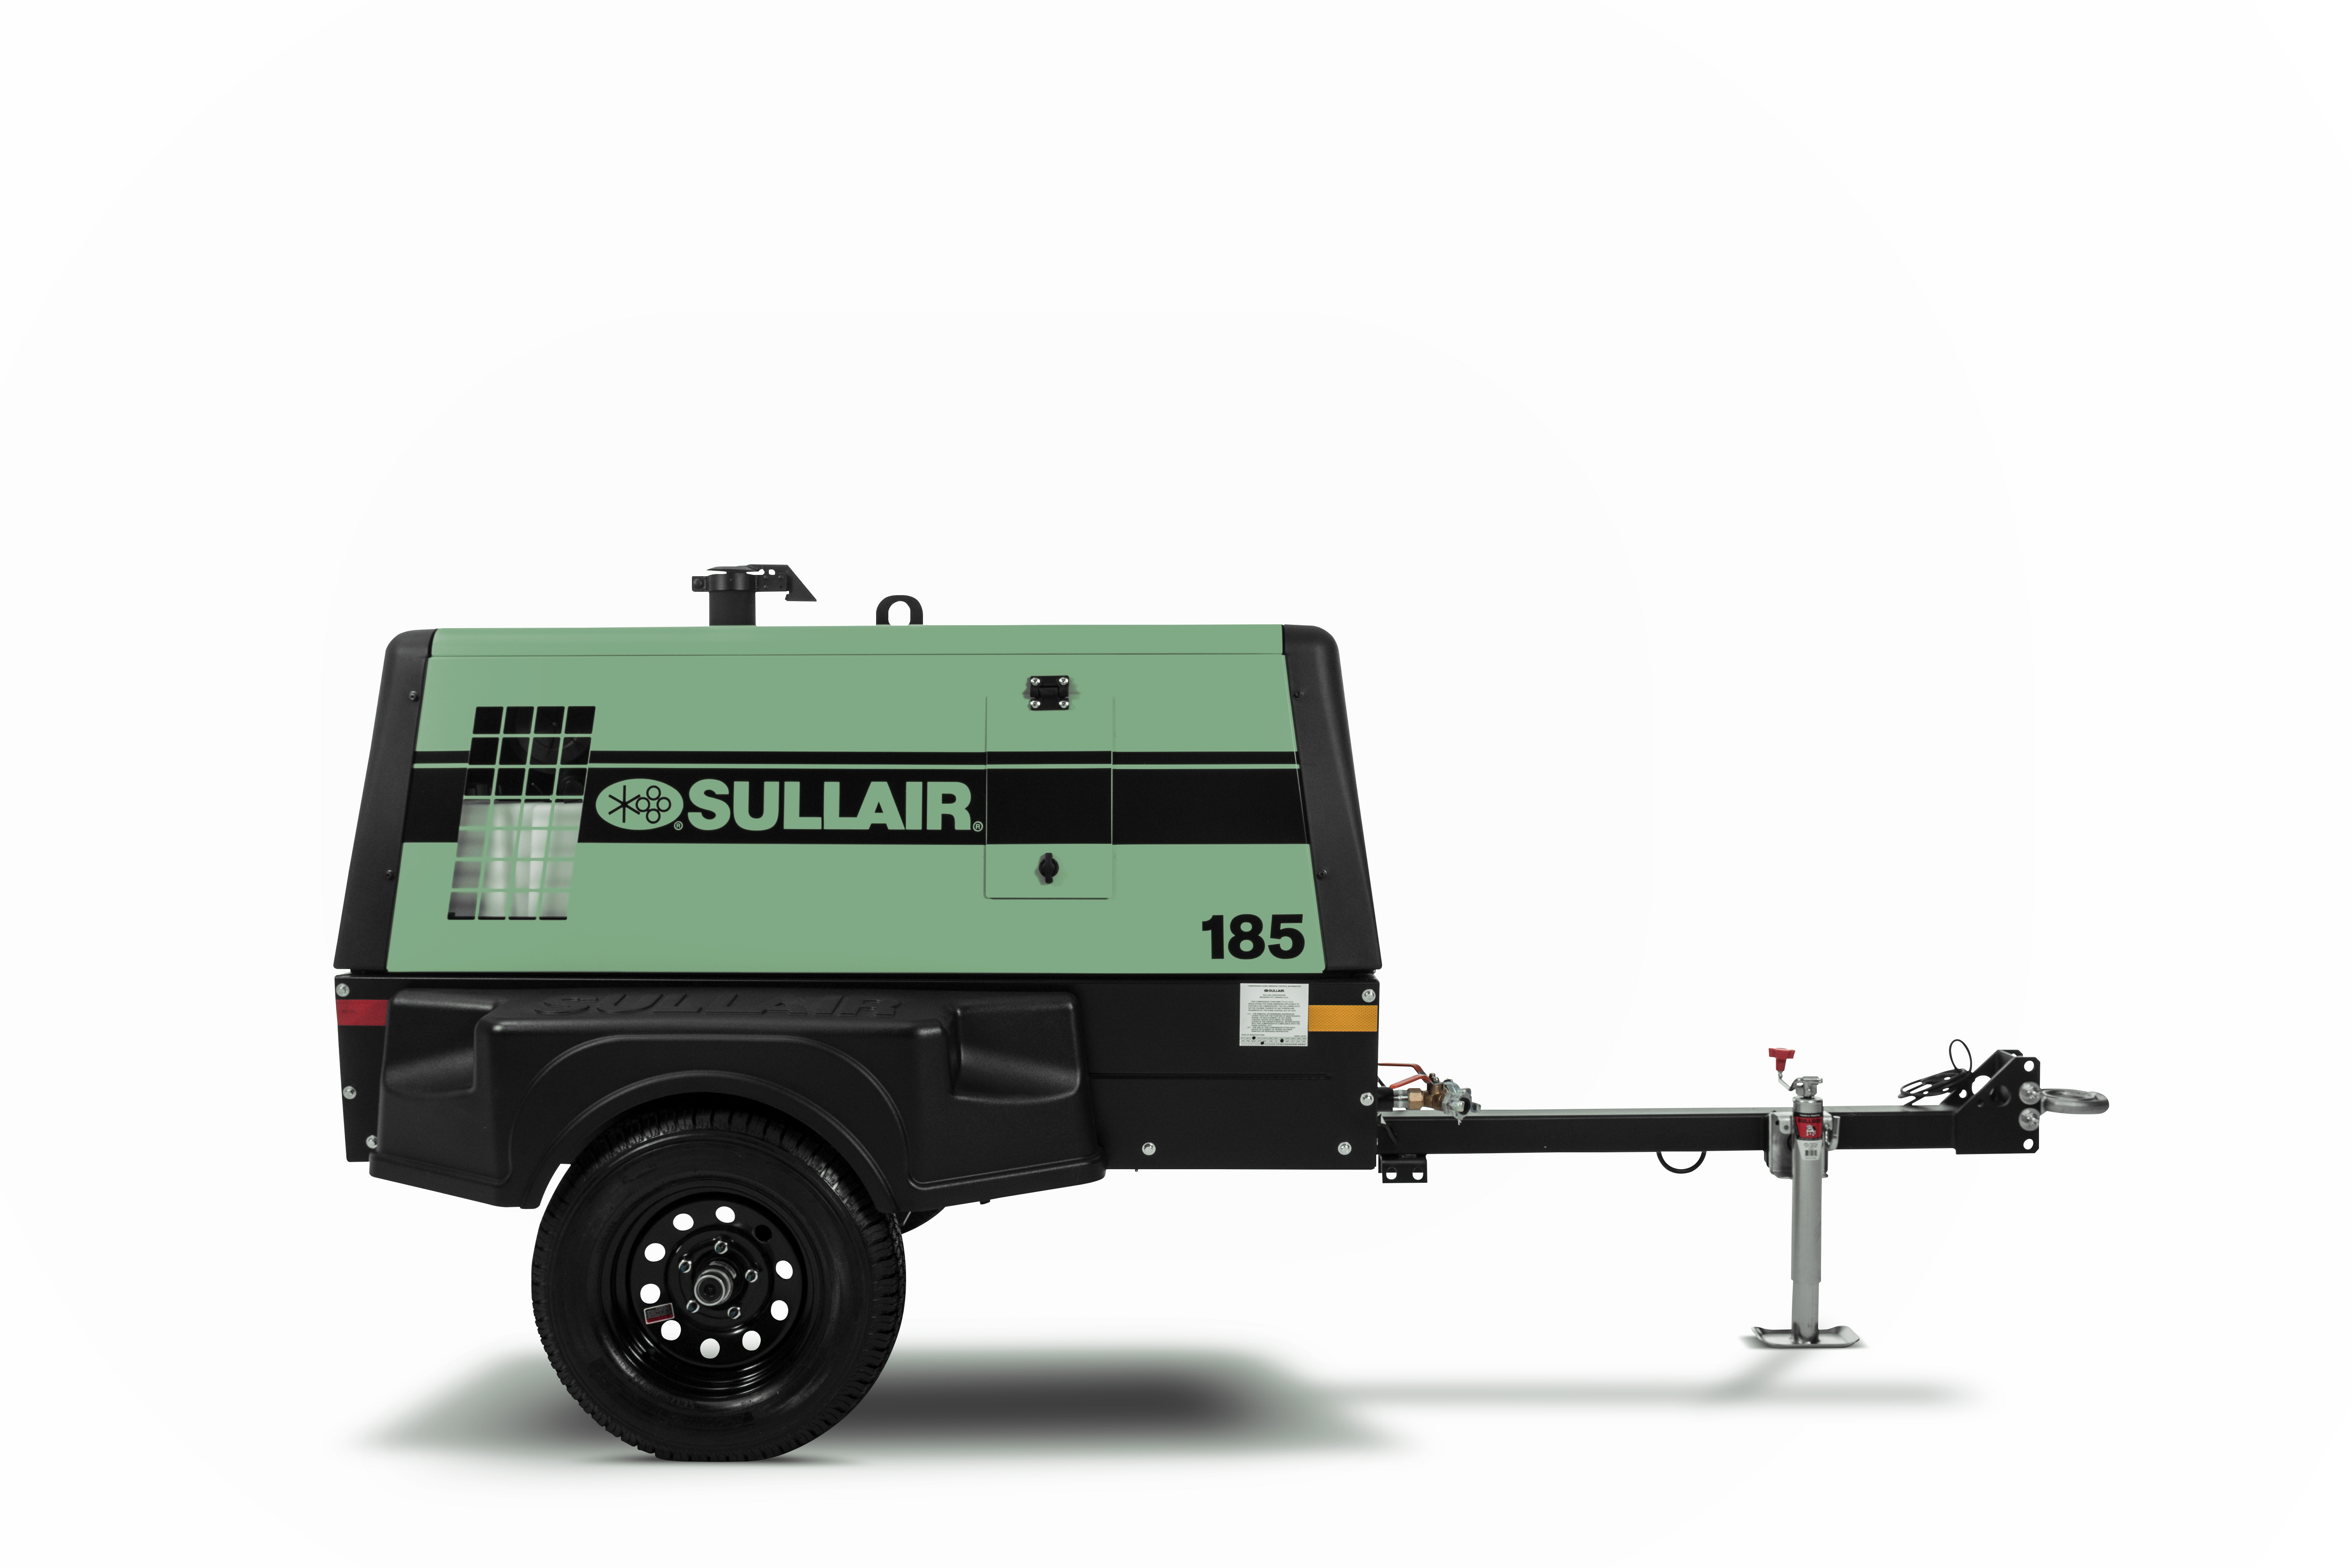 Sullair 185 Series now includes a Perkins diesel engine option